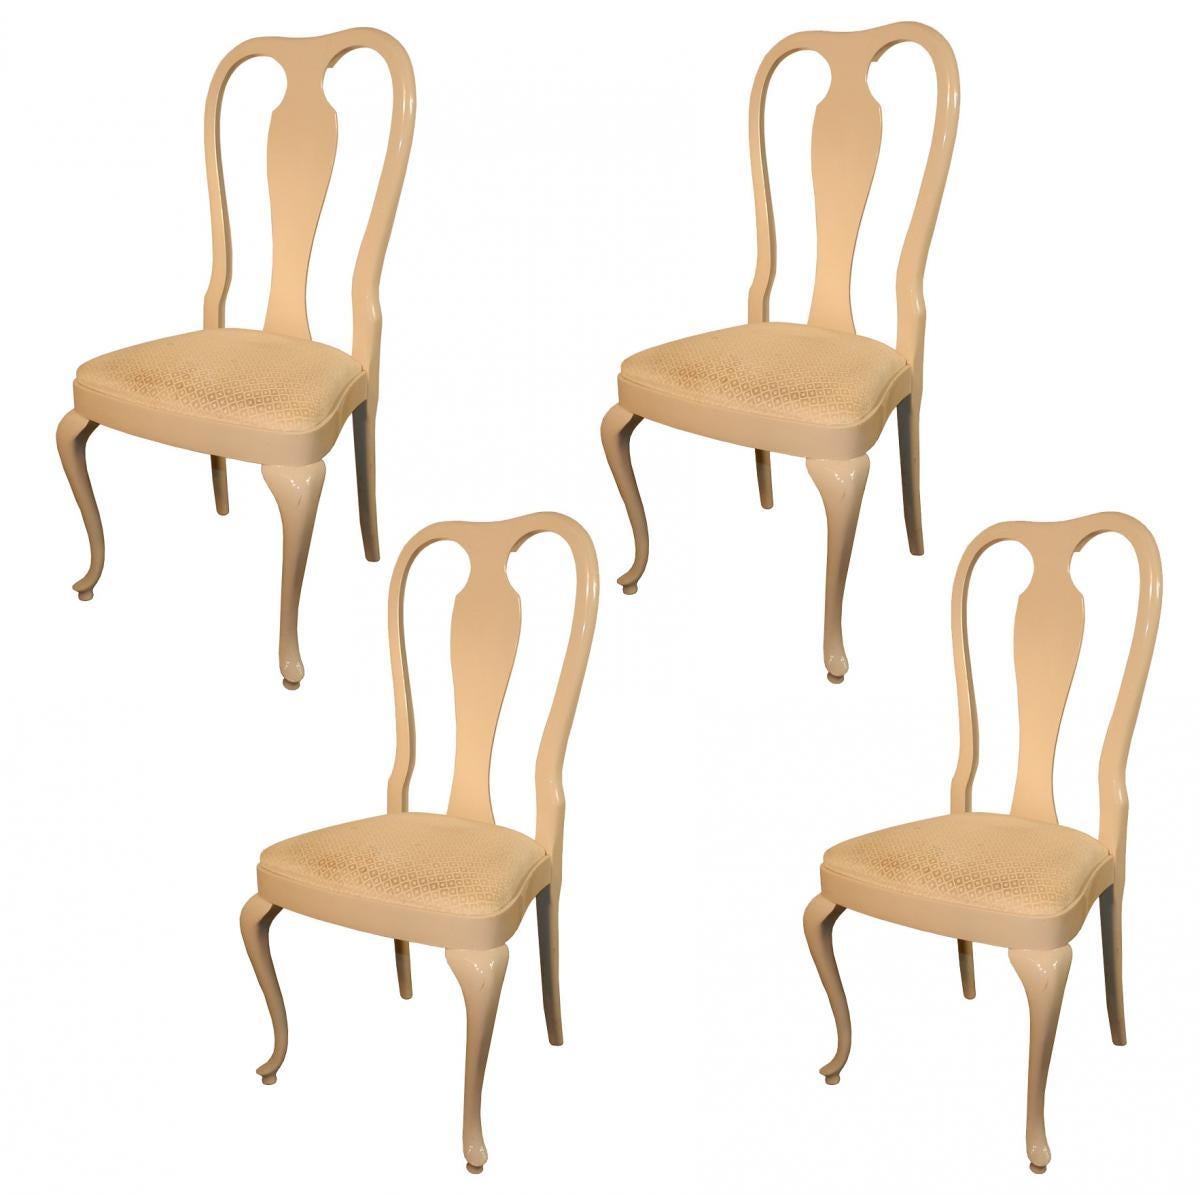 Rocco Turzi Decoration, Four Queen Ann Style Chairs in Lacquered Wood circa 1970 In Good Condition For Sale In Mouscron, WHT